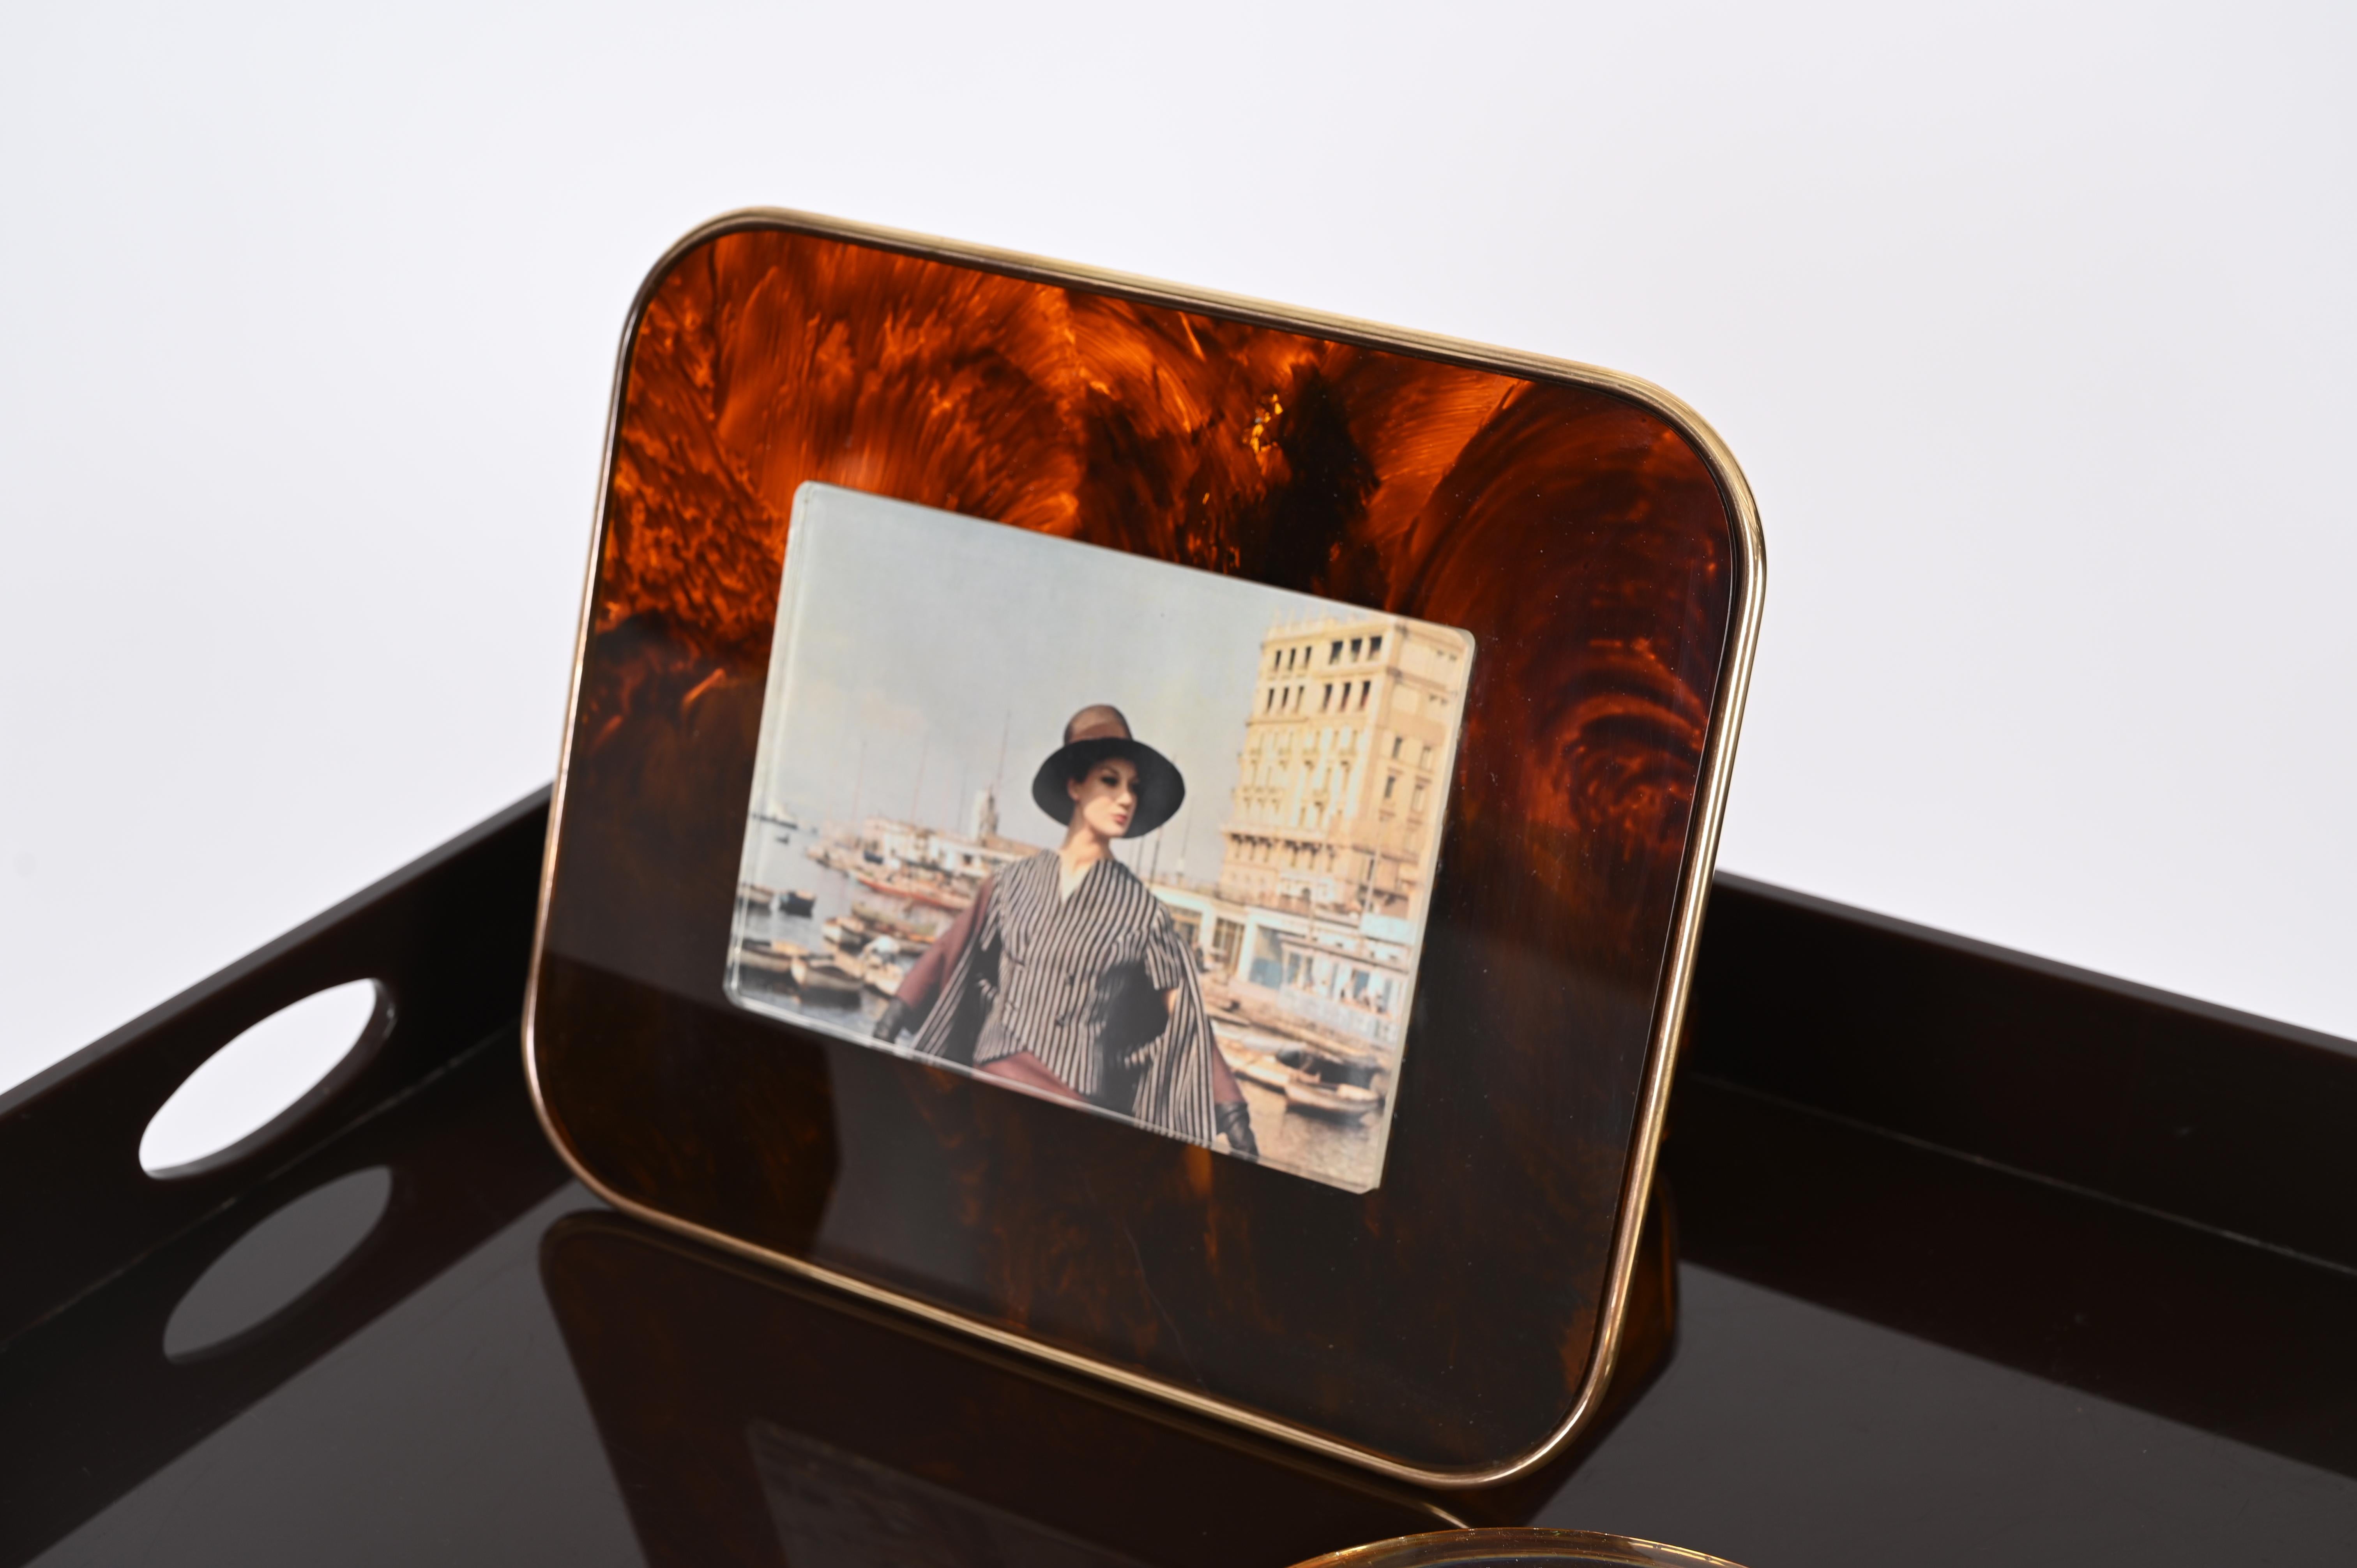 Gabriella Crespi Style Photo Frame in Lucite Tortoiseshell Brass, Italy, 1970s For Sale 10